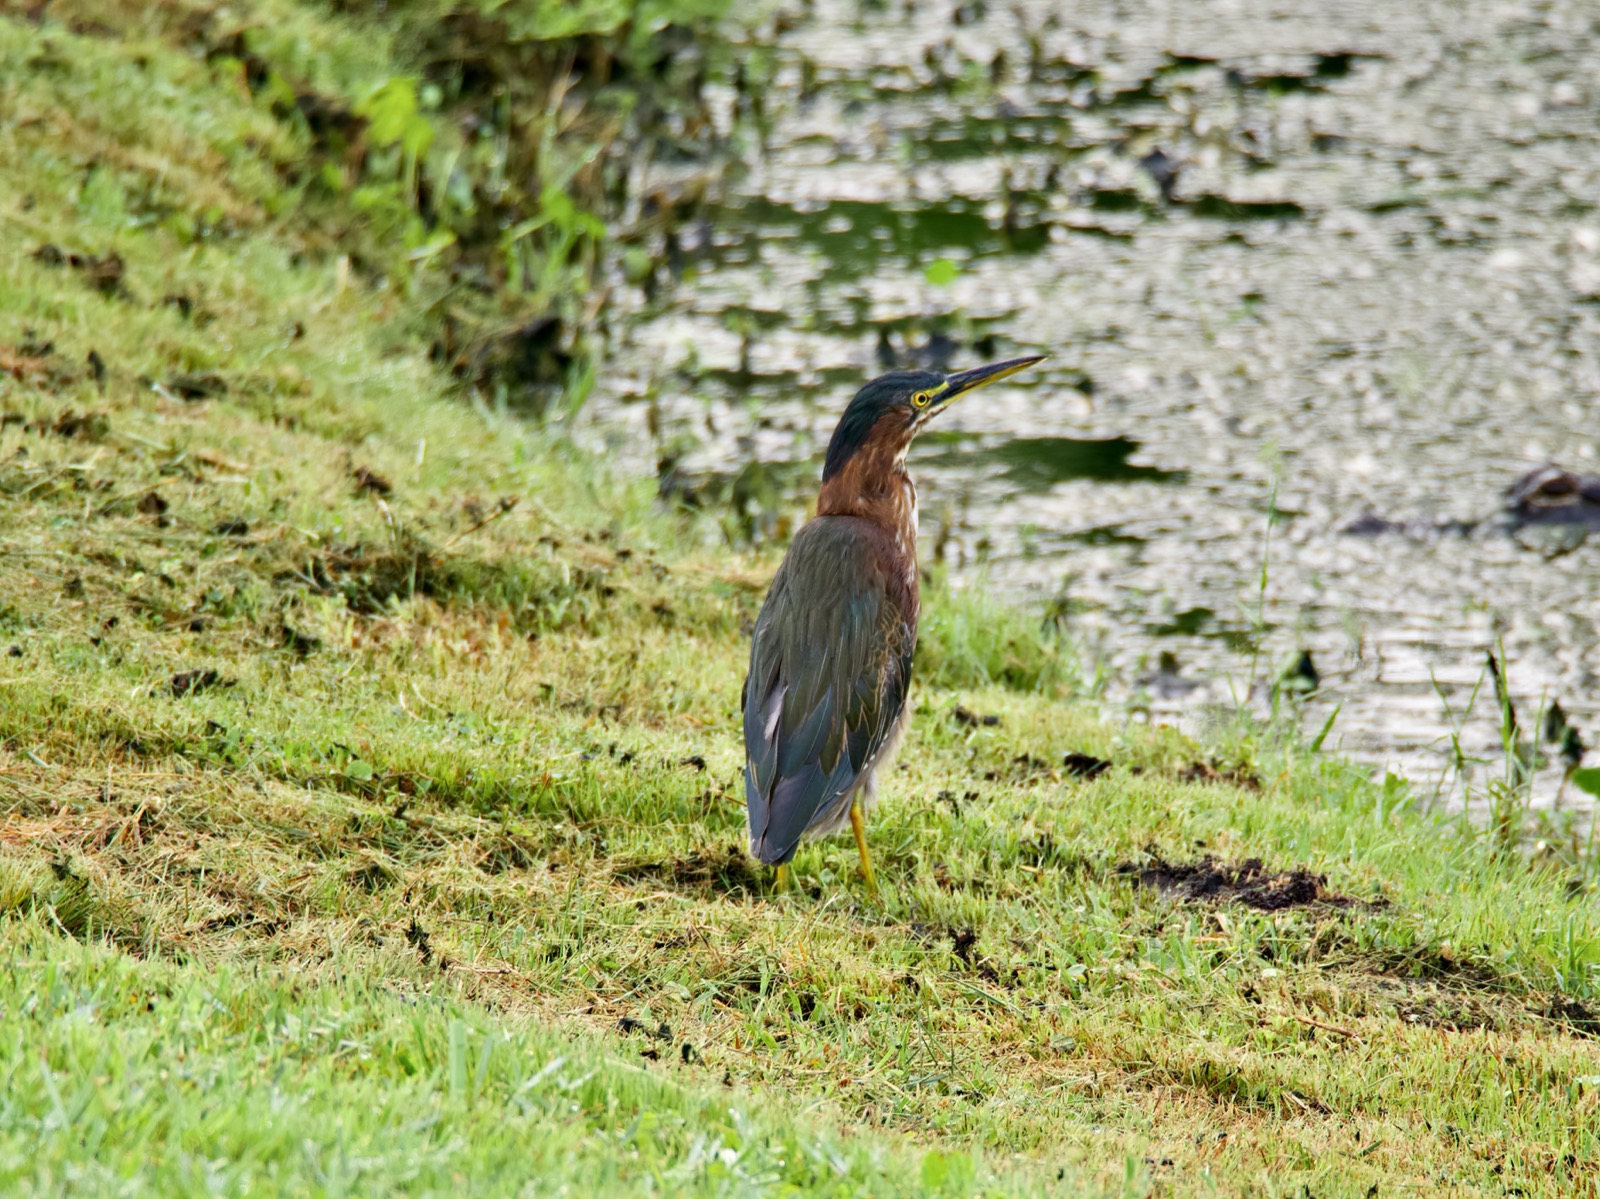 Telephoto closeup of a green heron at the edge of a pond.